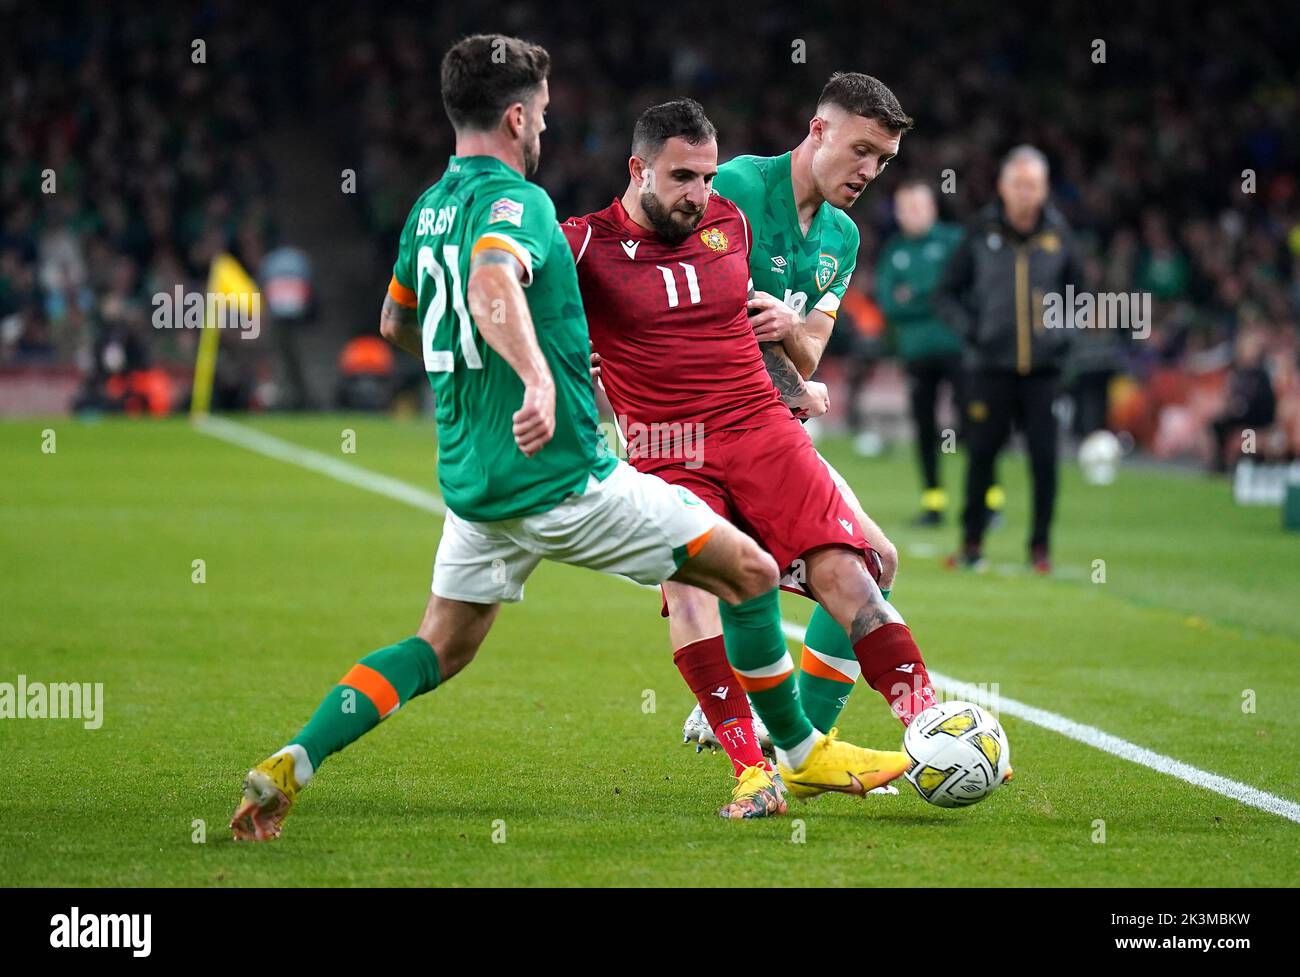 Armenia's Tigran Barseghyan (centre) battles the ball with Republic of Ireland's Robbie Brady (left) and Conor Hourihane during the UEFA Nations League match at the Aviva Stadium in Dublin, Ireland. Picture date: Tuesday September 27, 2022. Stock Photo